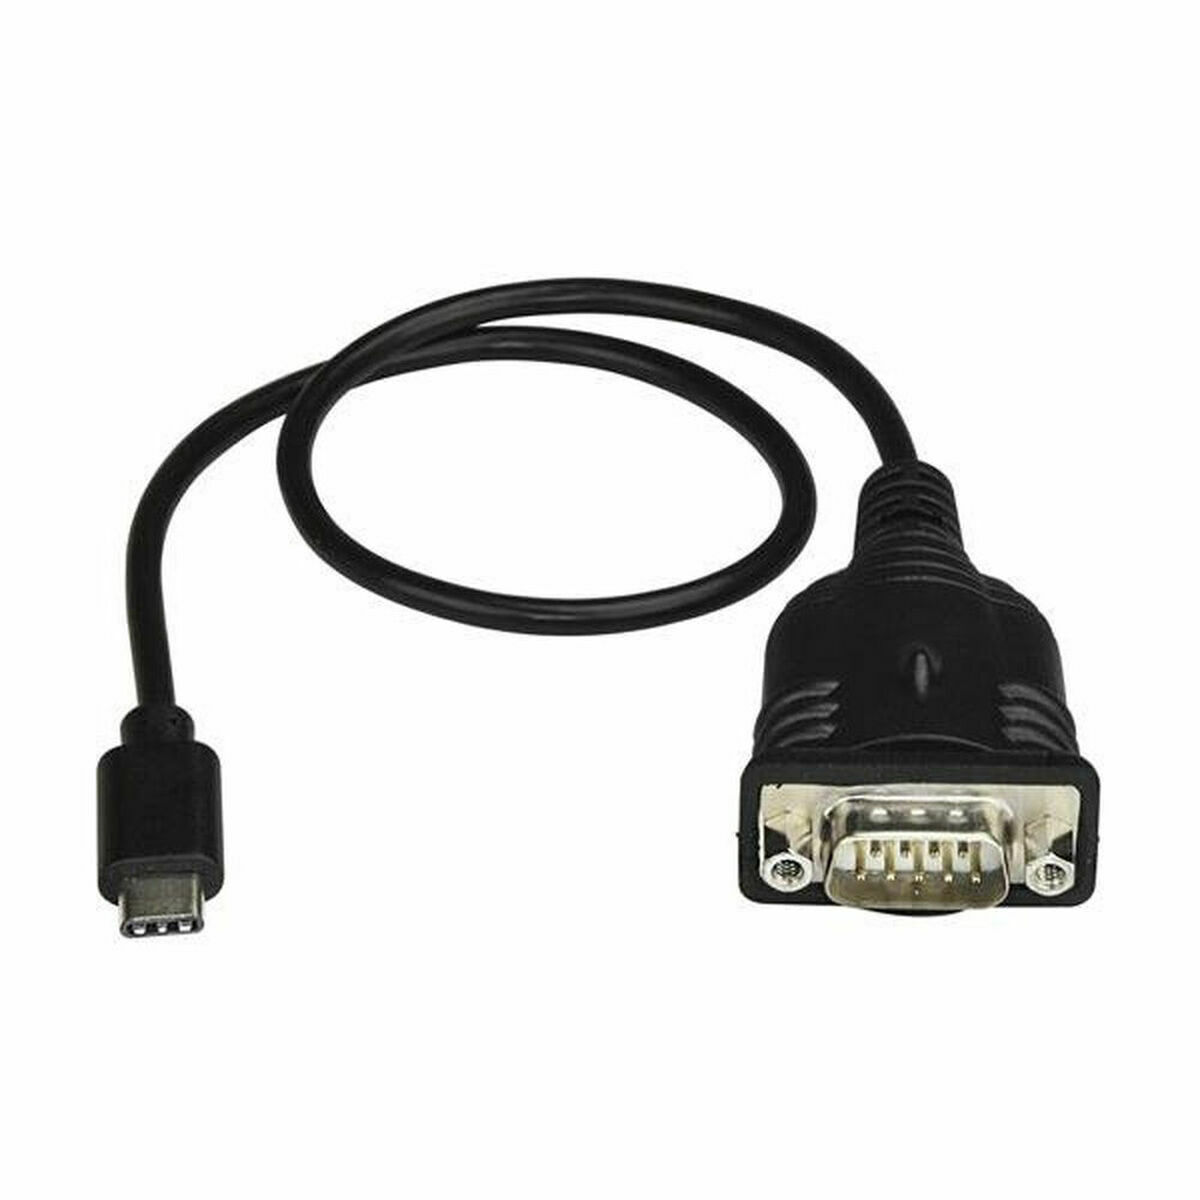 USB to Serial Port Cable Startech ICUSB232PROC         Black